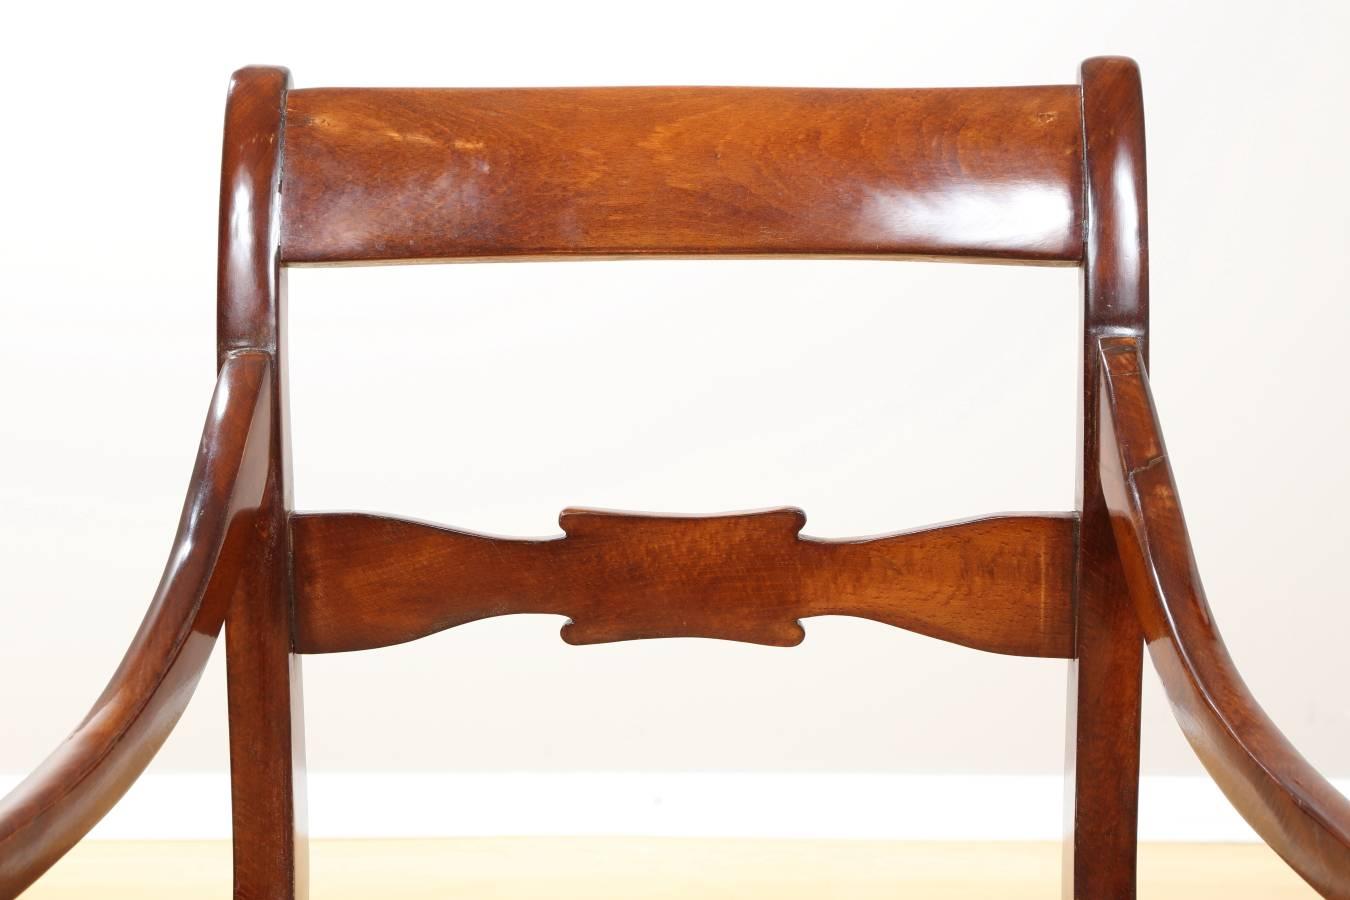 Biedermeier mahogany chair, circa 1830. Elegant chair with mahogany frame from Germany Biedermeier period. The chair has been restored, reupholstered, and hand polished with natural shellac. Measures: Seat height 19